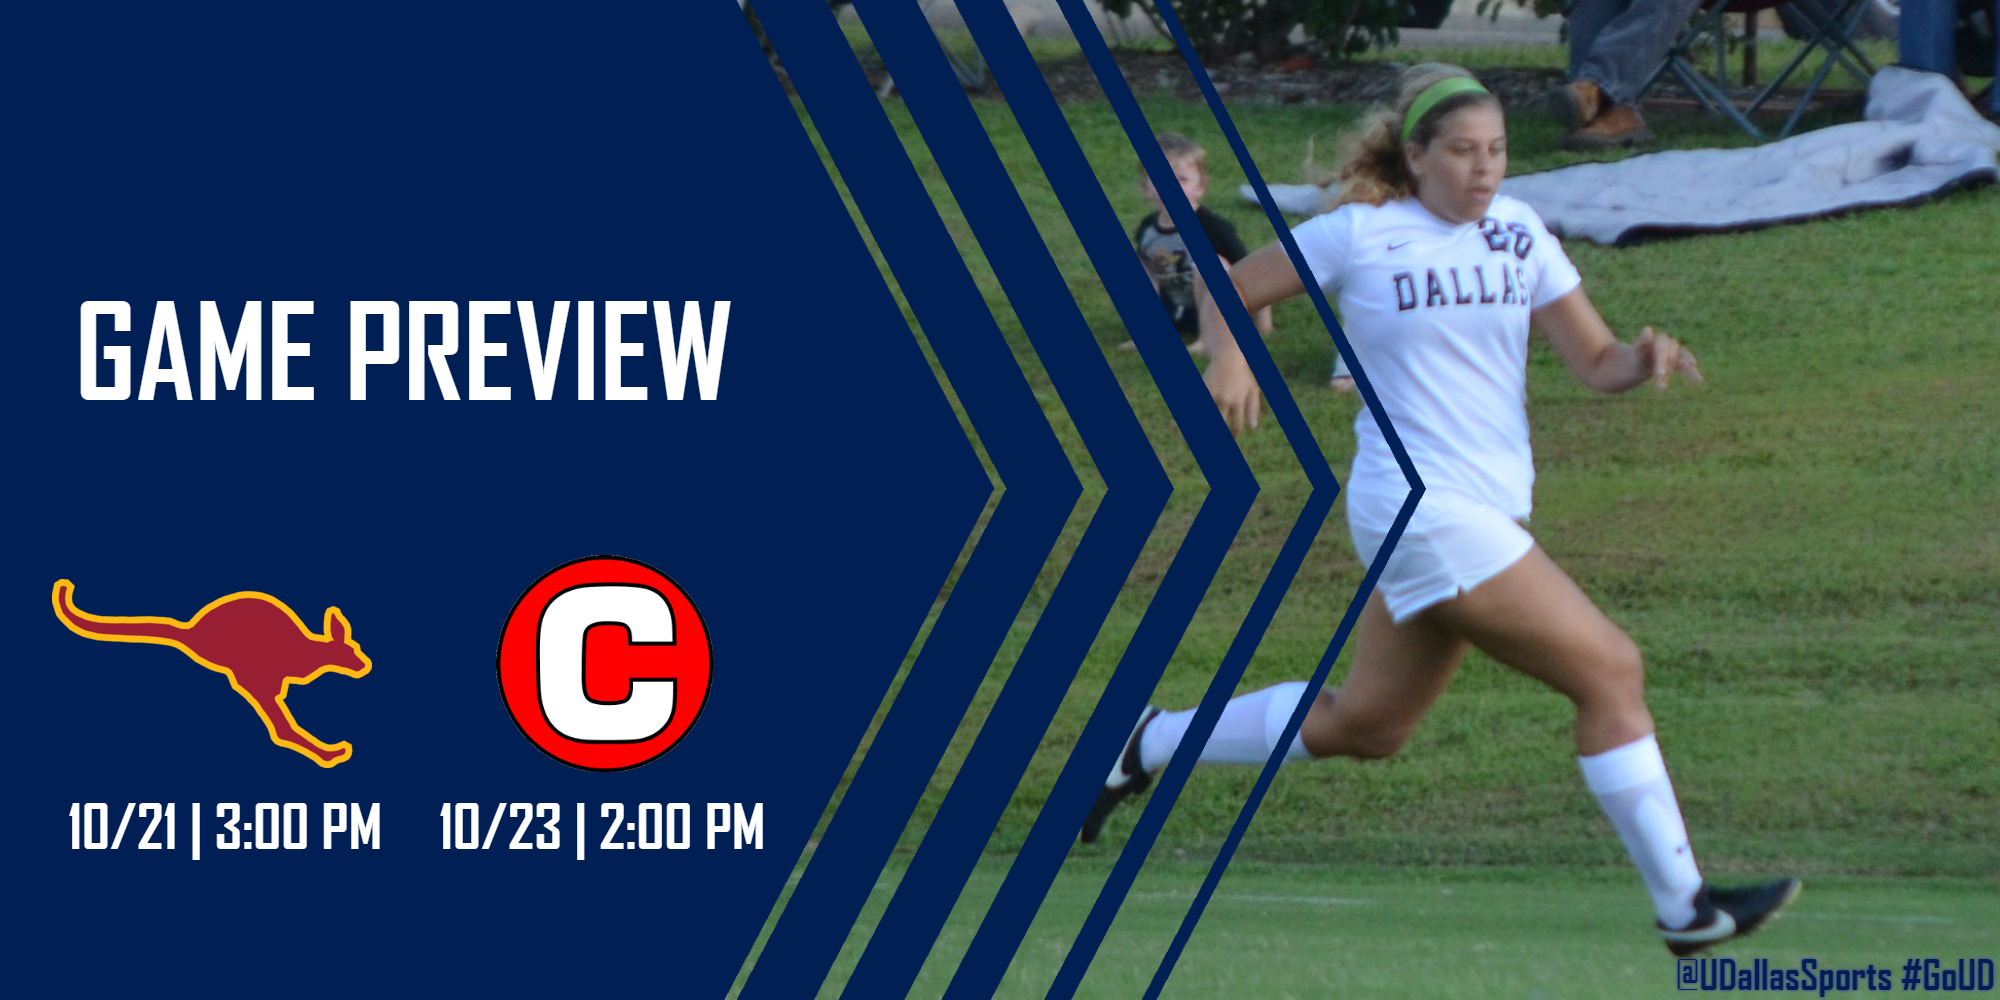 PREVIEW: Women's Soccer at Austin College (10/21) | Centenary College (10/23)